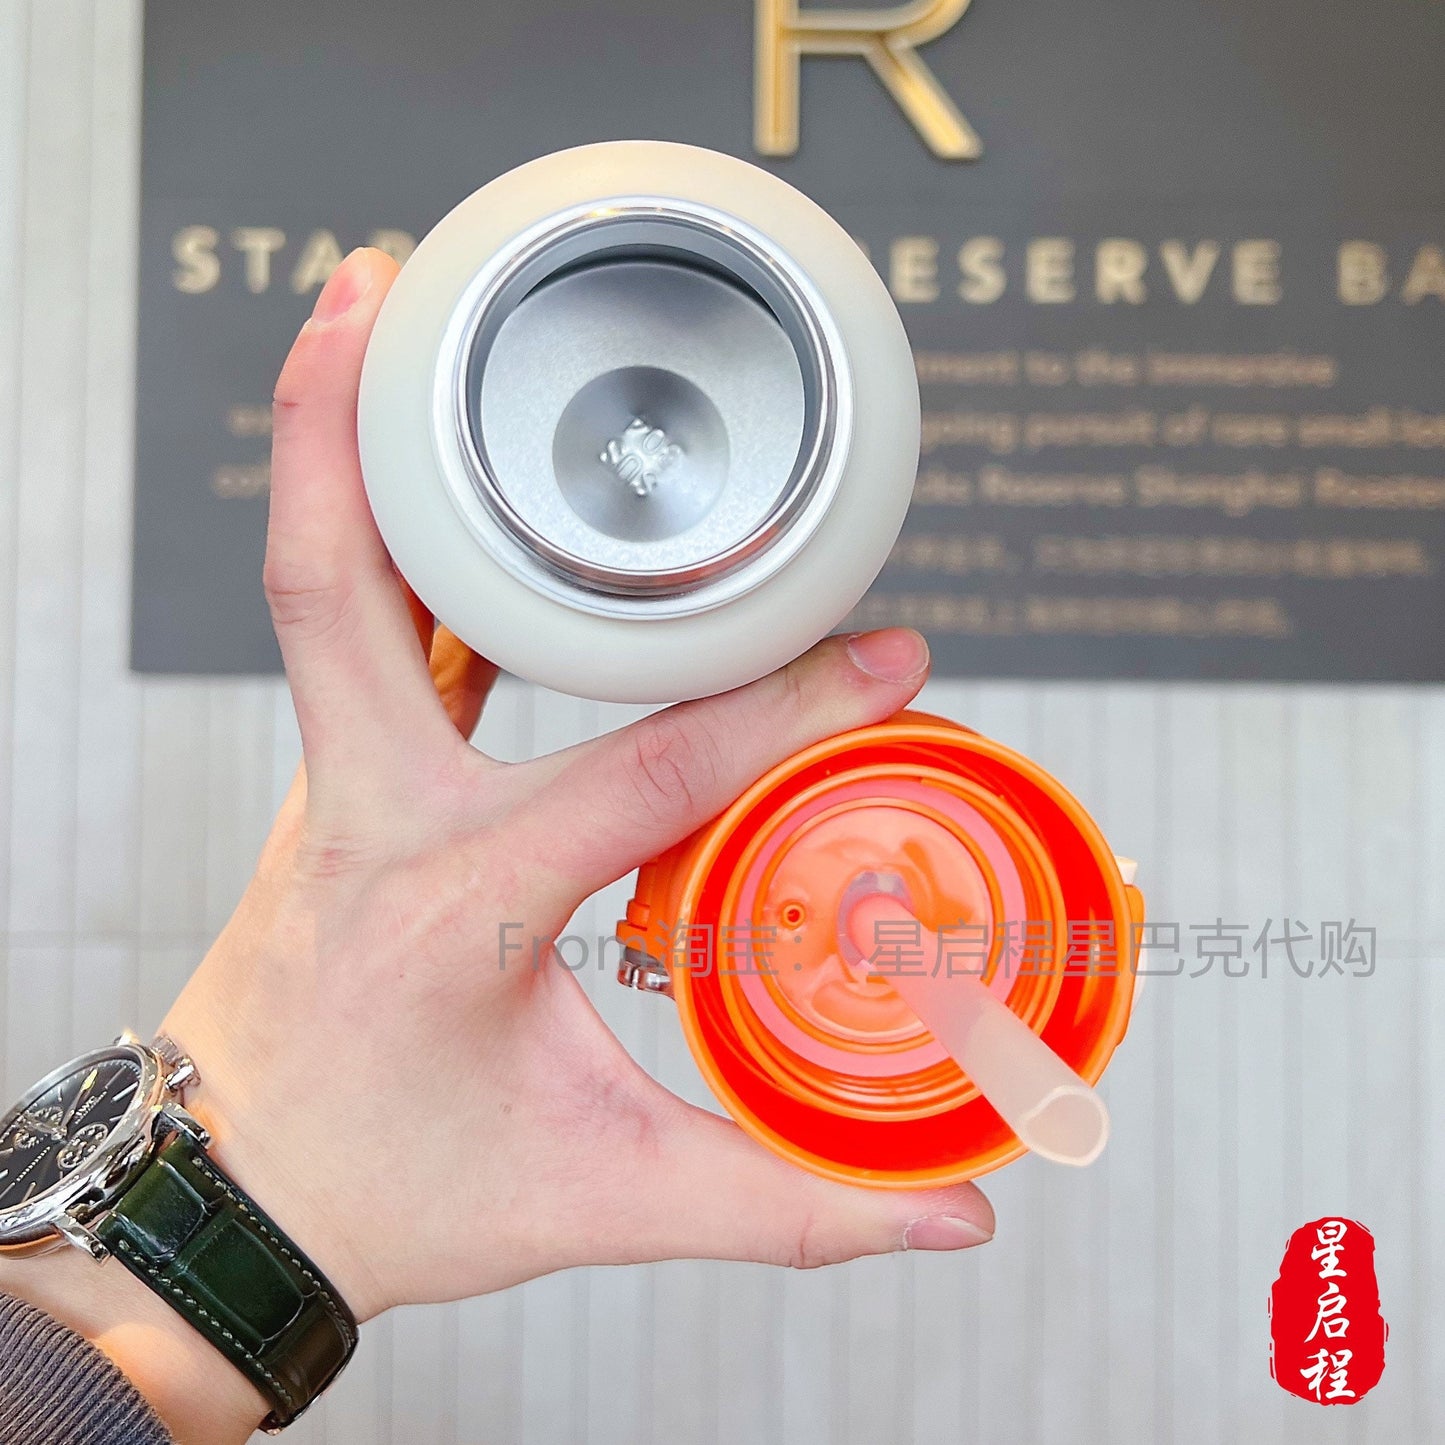 Starbucks China 375ml 2022 new year tiger series orange tiger stainless vacuum straw cup with tiger bear plush toy cup holder